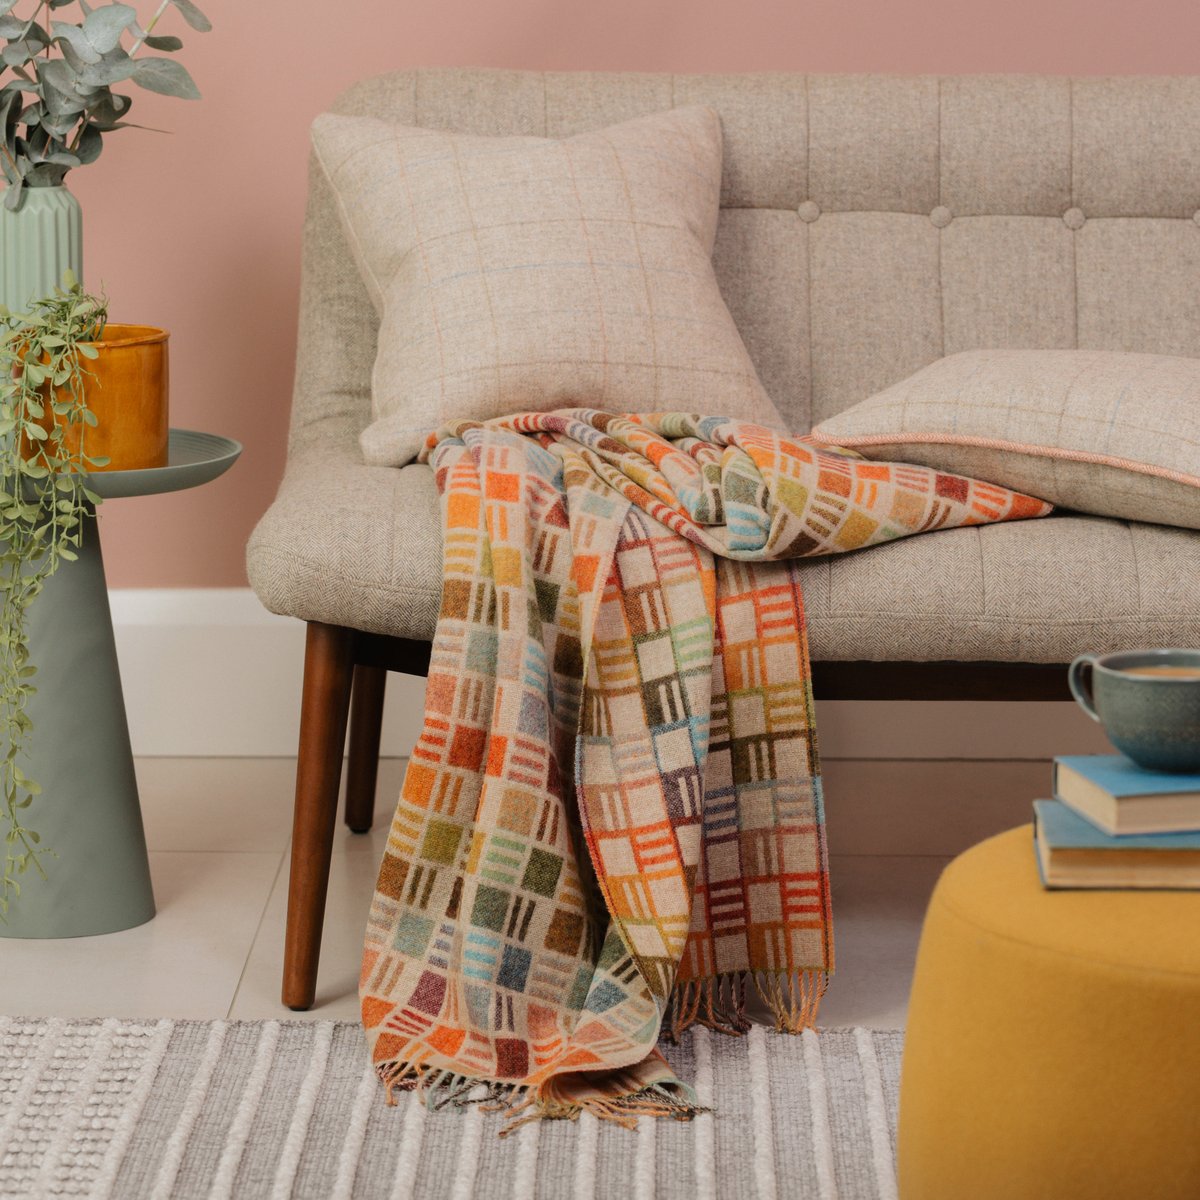 Radiating a personality of playful sophistication with its unique double-face pattern - our Multi-Ribbon Merino throw effortlessly settles into contemporary and rustic spaces alike as a cosy statement piece.

#lovewool #interiorstyle #interiordesign #colourmyhome